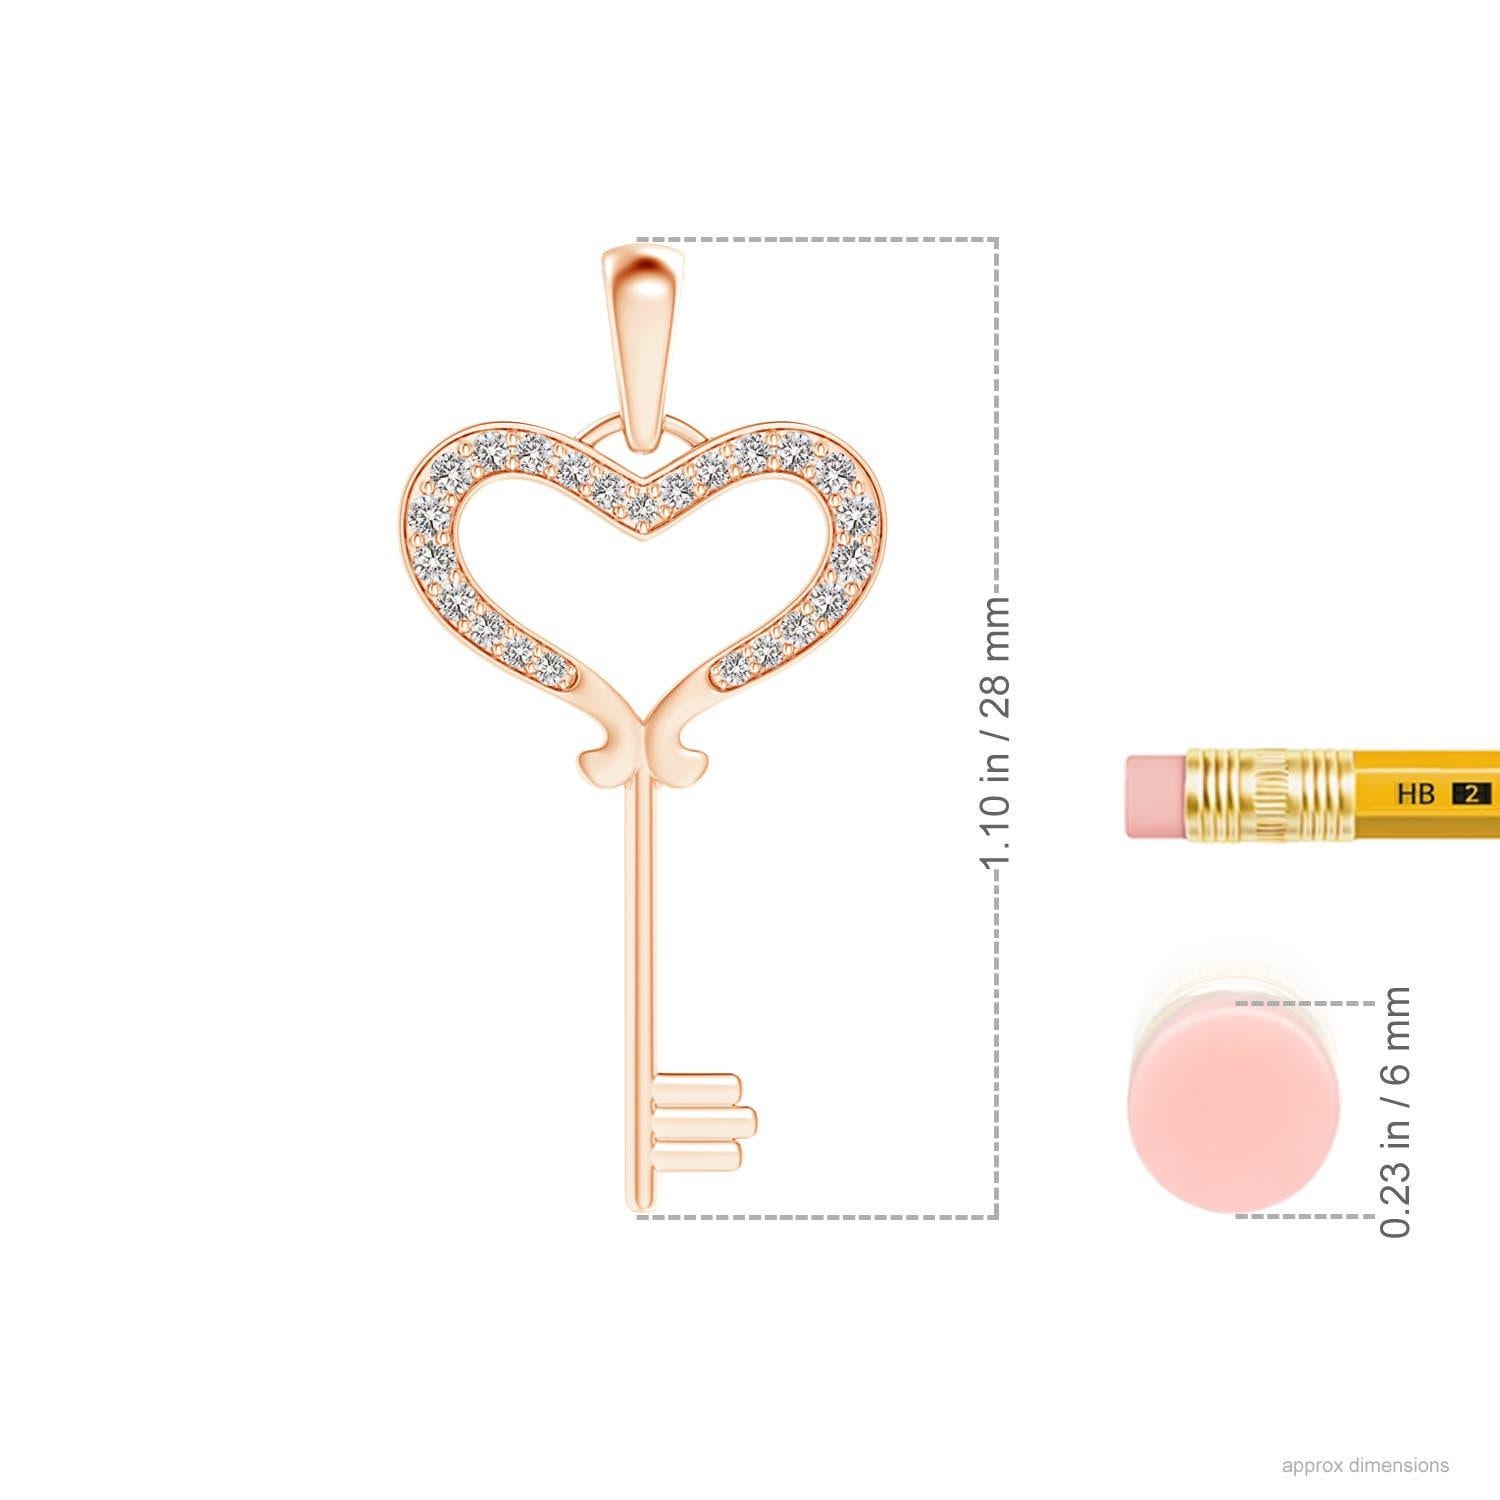 This adorable heart key pendant is designed with a touch of romance. Diamonds, encrusted on the open heart, dazzle in an intricate pave setting. Beautifully crafted in 14k rose gold, this diamond key pendant embodies timeless glamour.
Diamond is the